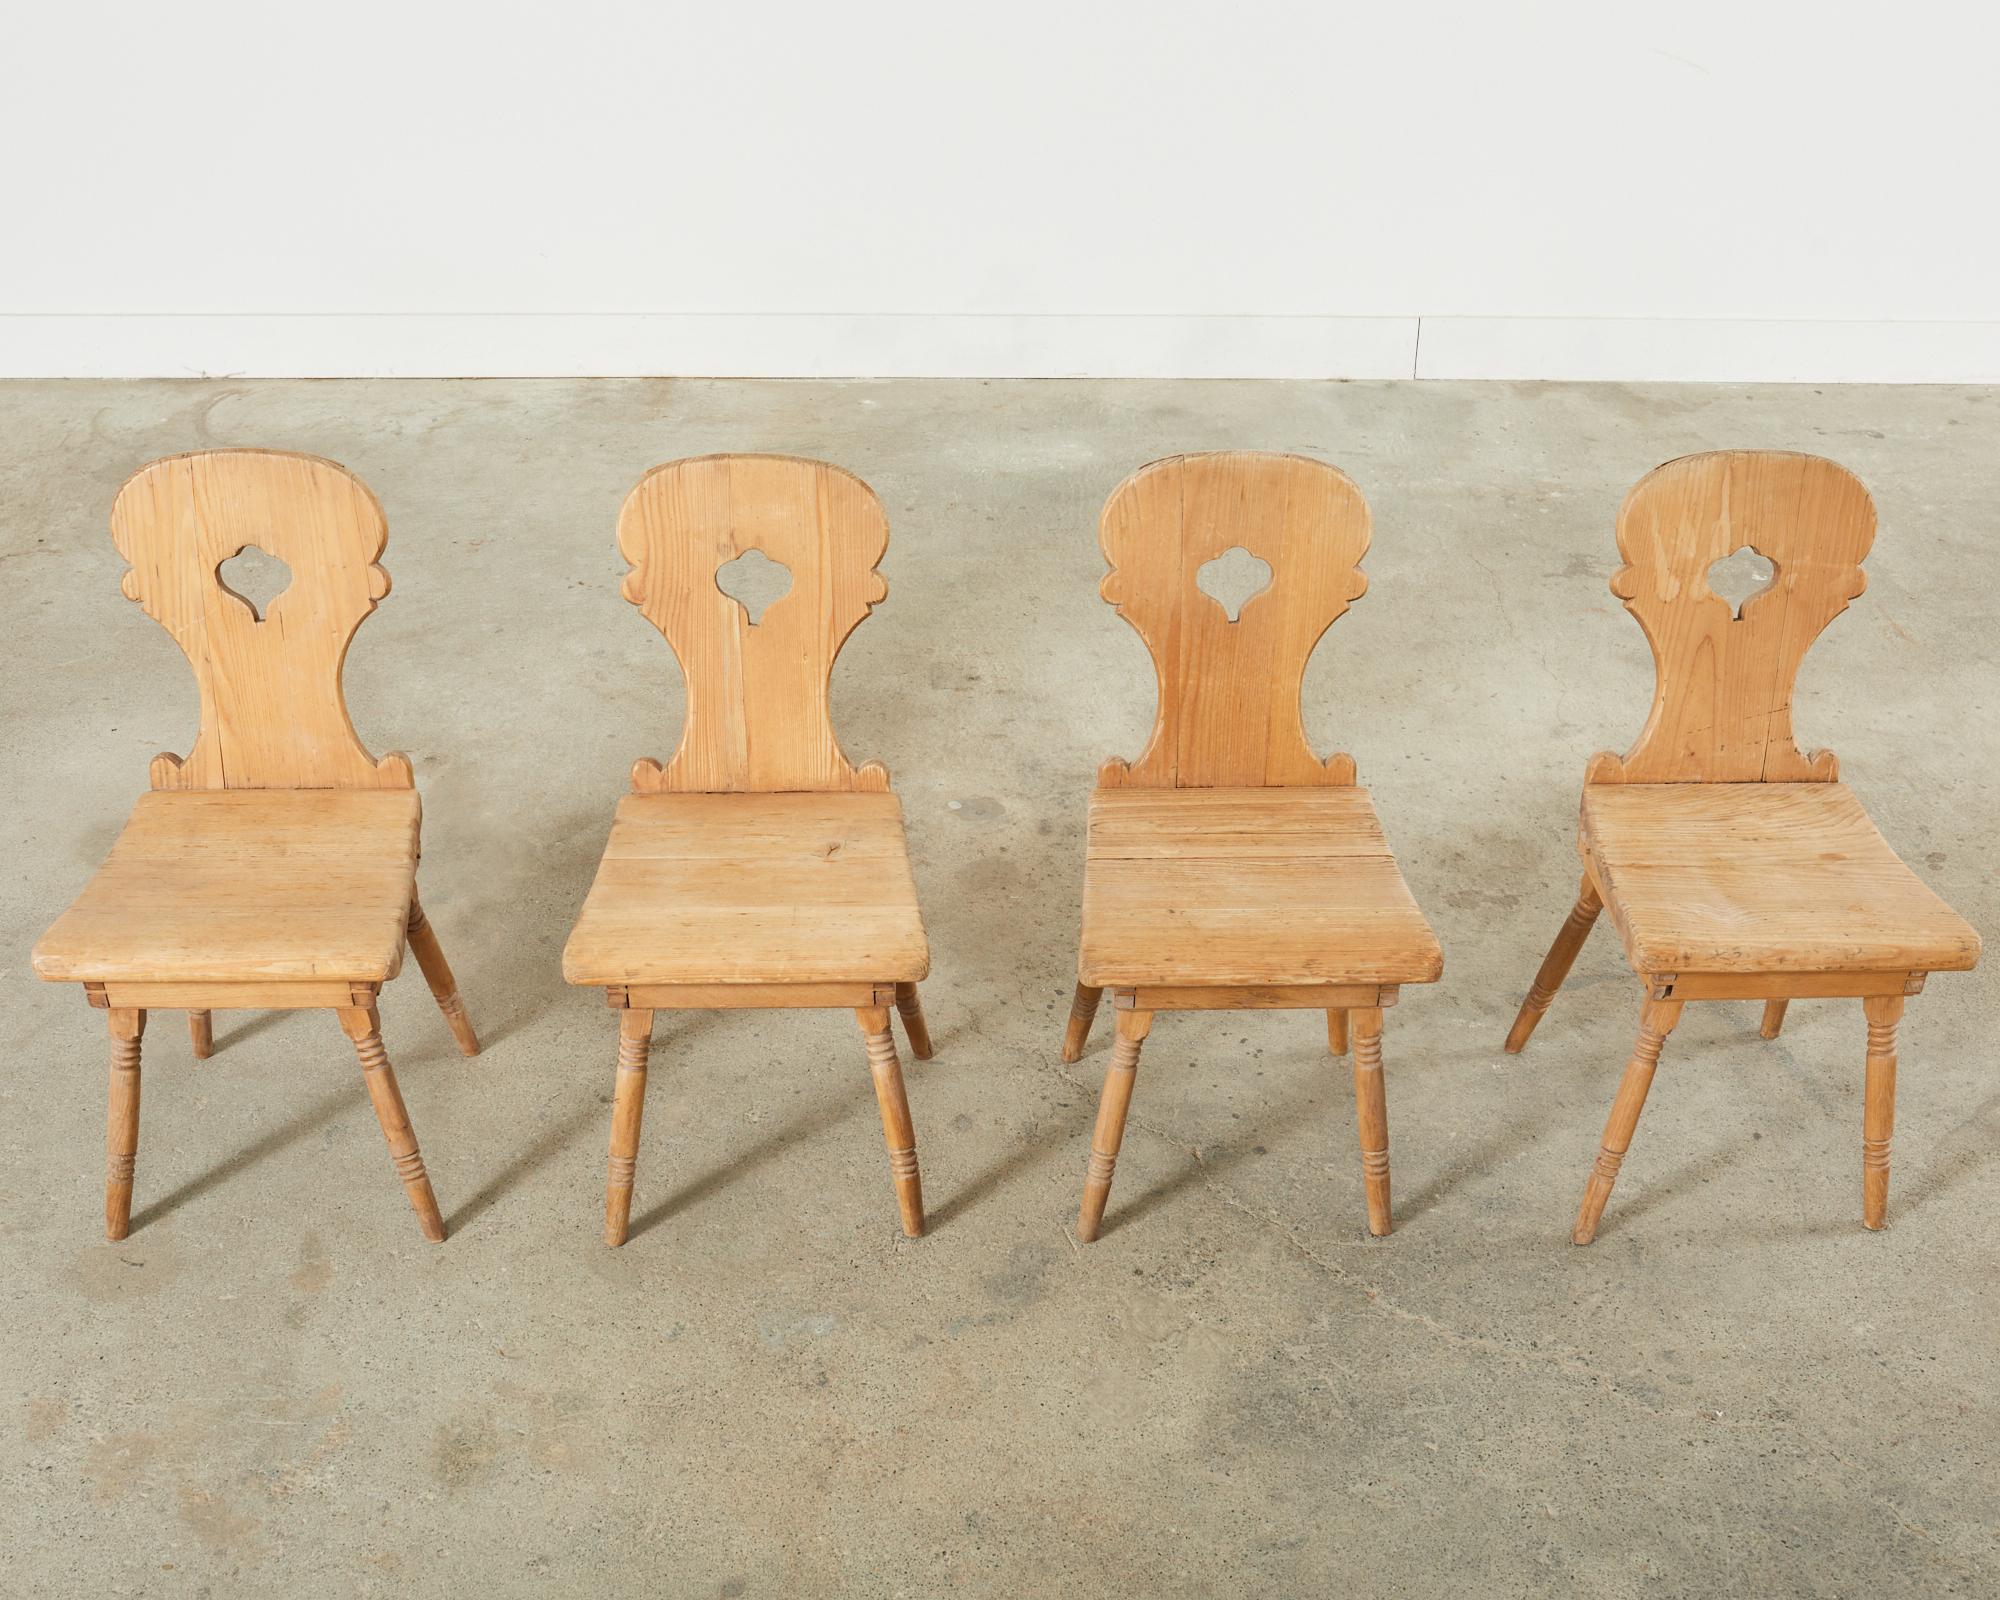 Hand-Crafted Set of Four 19th Century Primitive Swedish Folk Art Pine Chairs For Sale